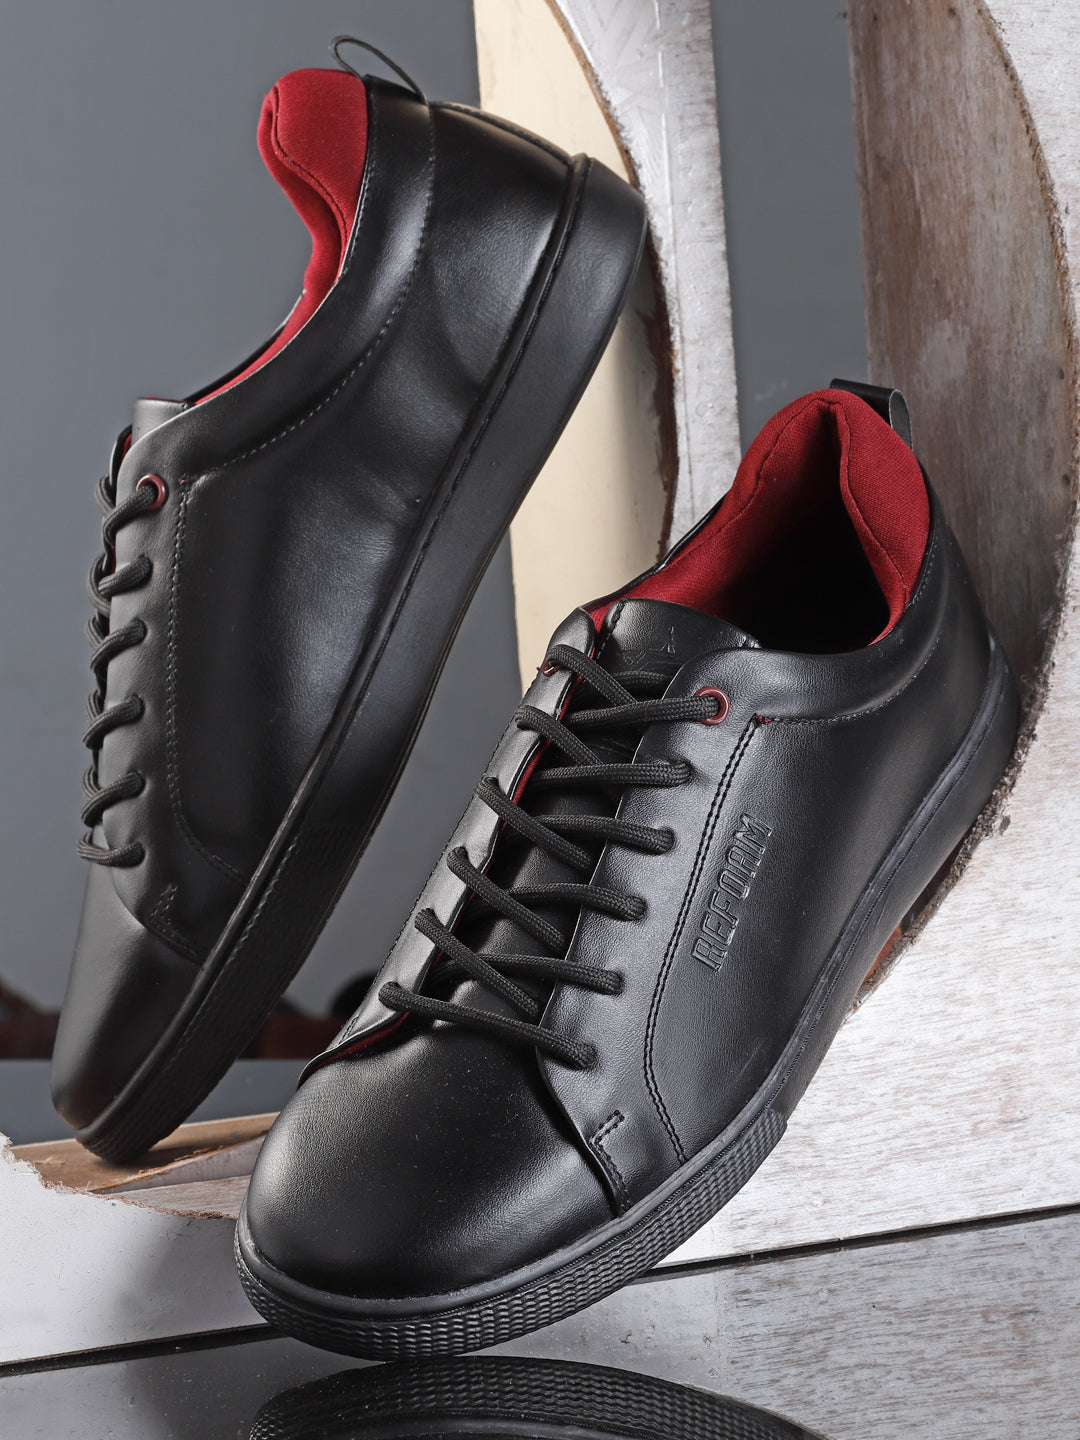 Black Solid Synthetic Leather & Comfort Foam Lace Up Sneakers For Men